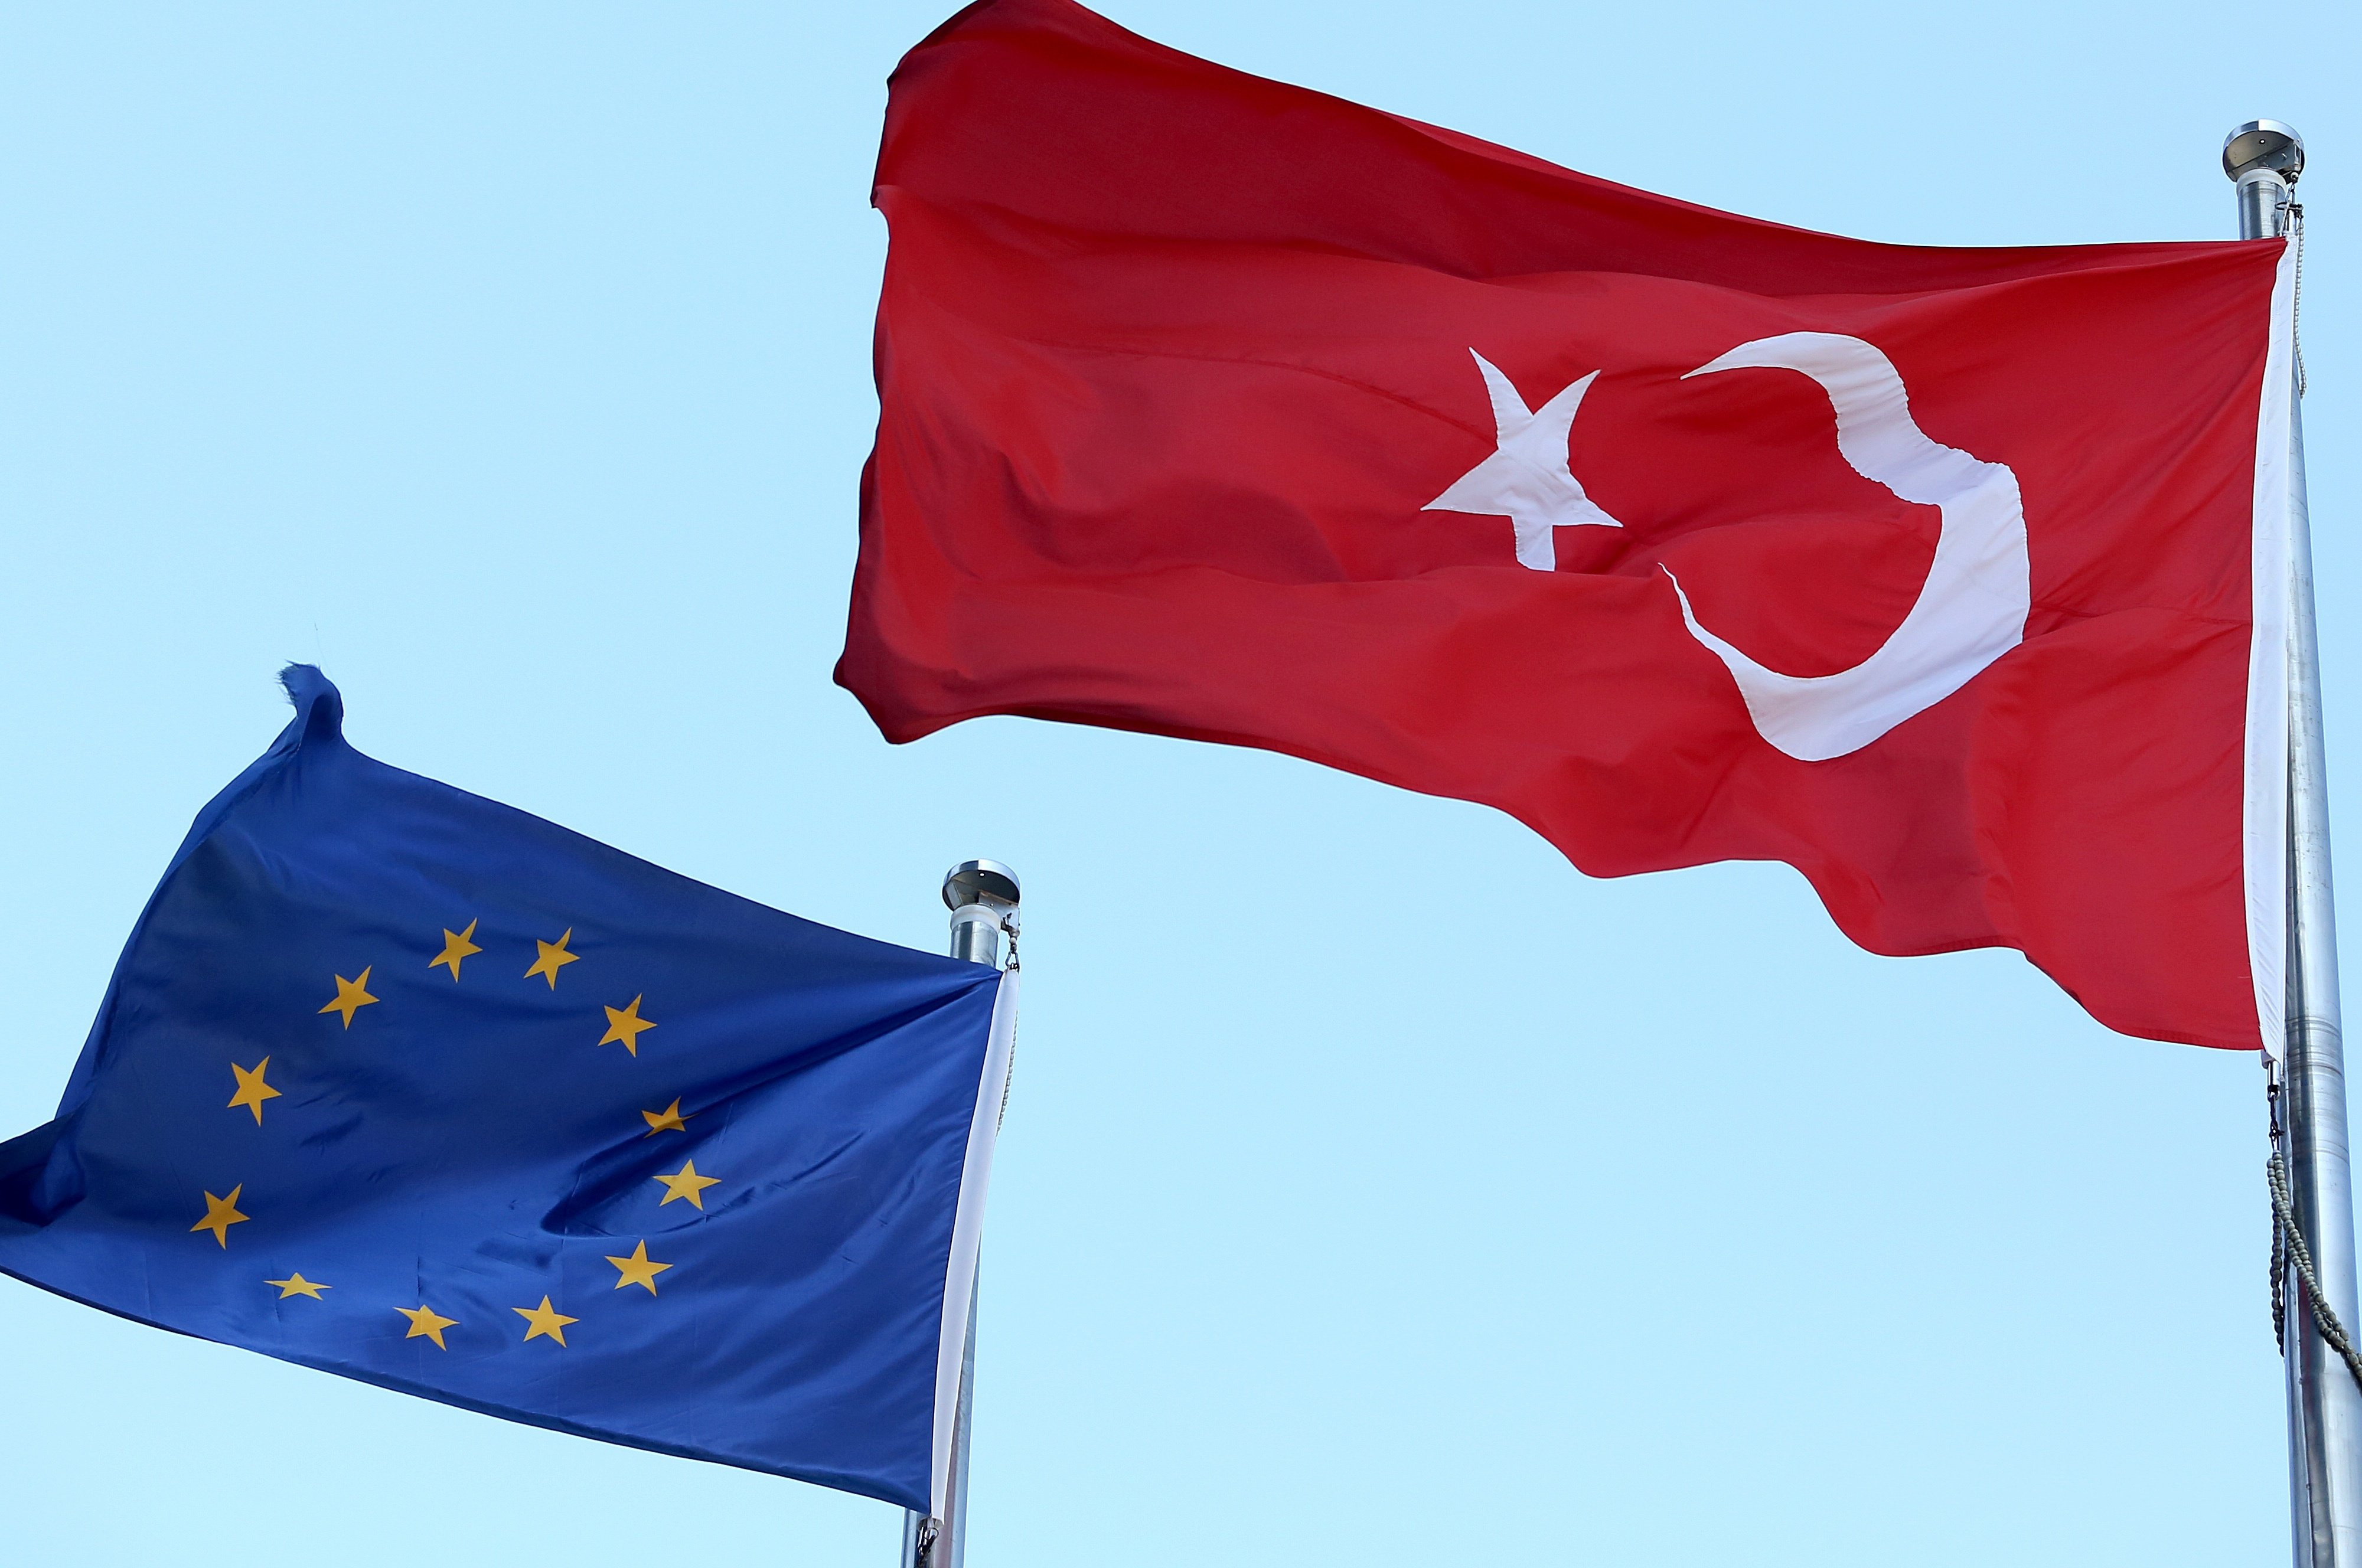 Turkophobia reflects a concerning rise in anti-Turkish sentiment in Europe since 2001, driven by populist politics, economic uncertainties and cultural tensions. (EPA Photo)